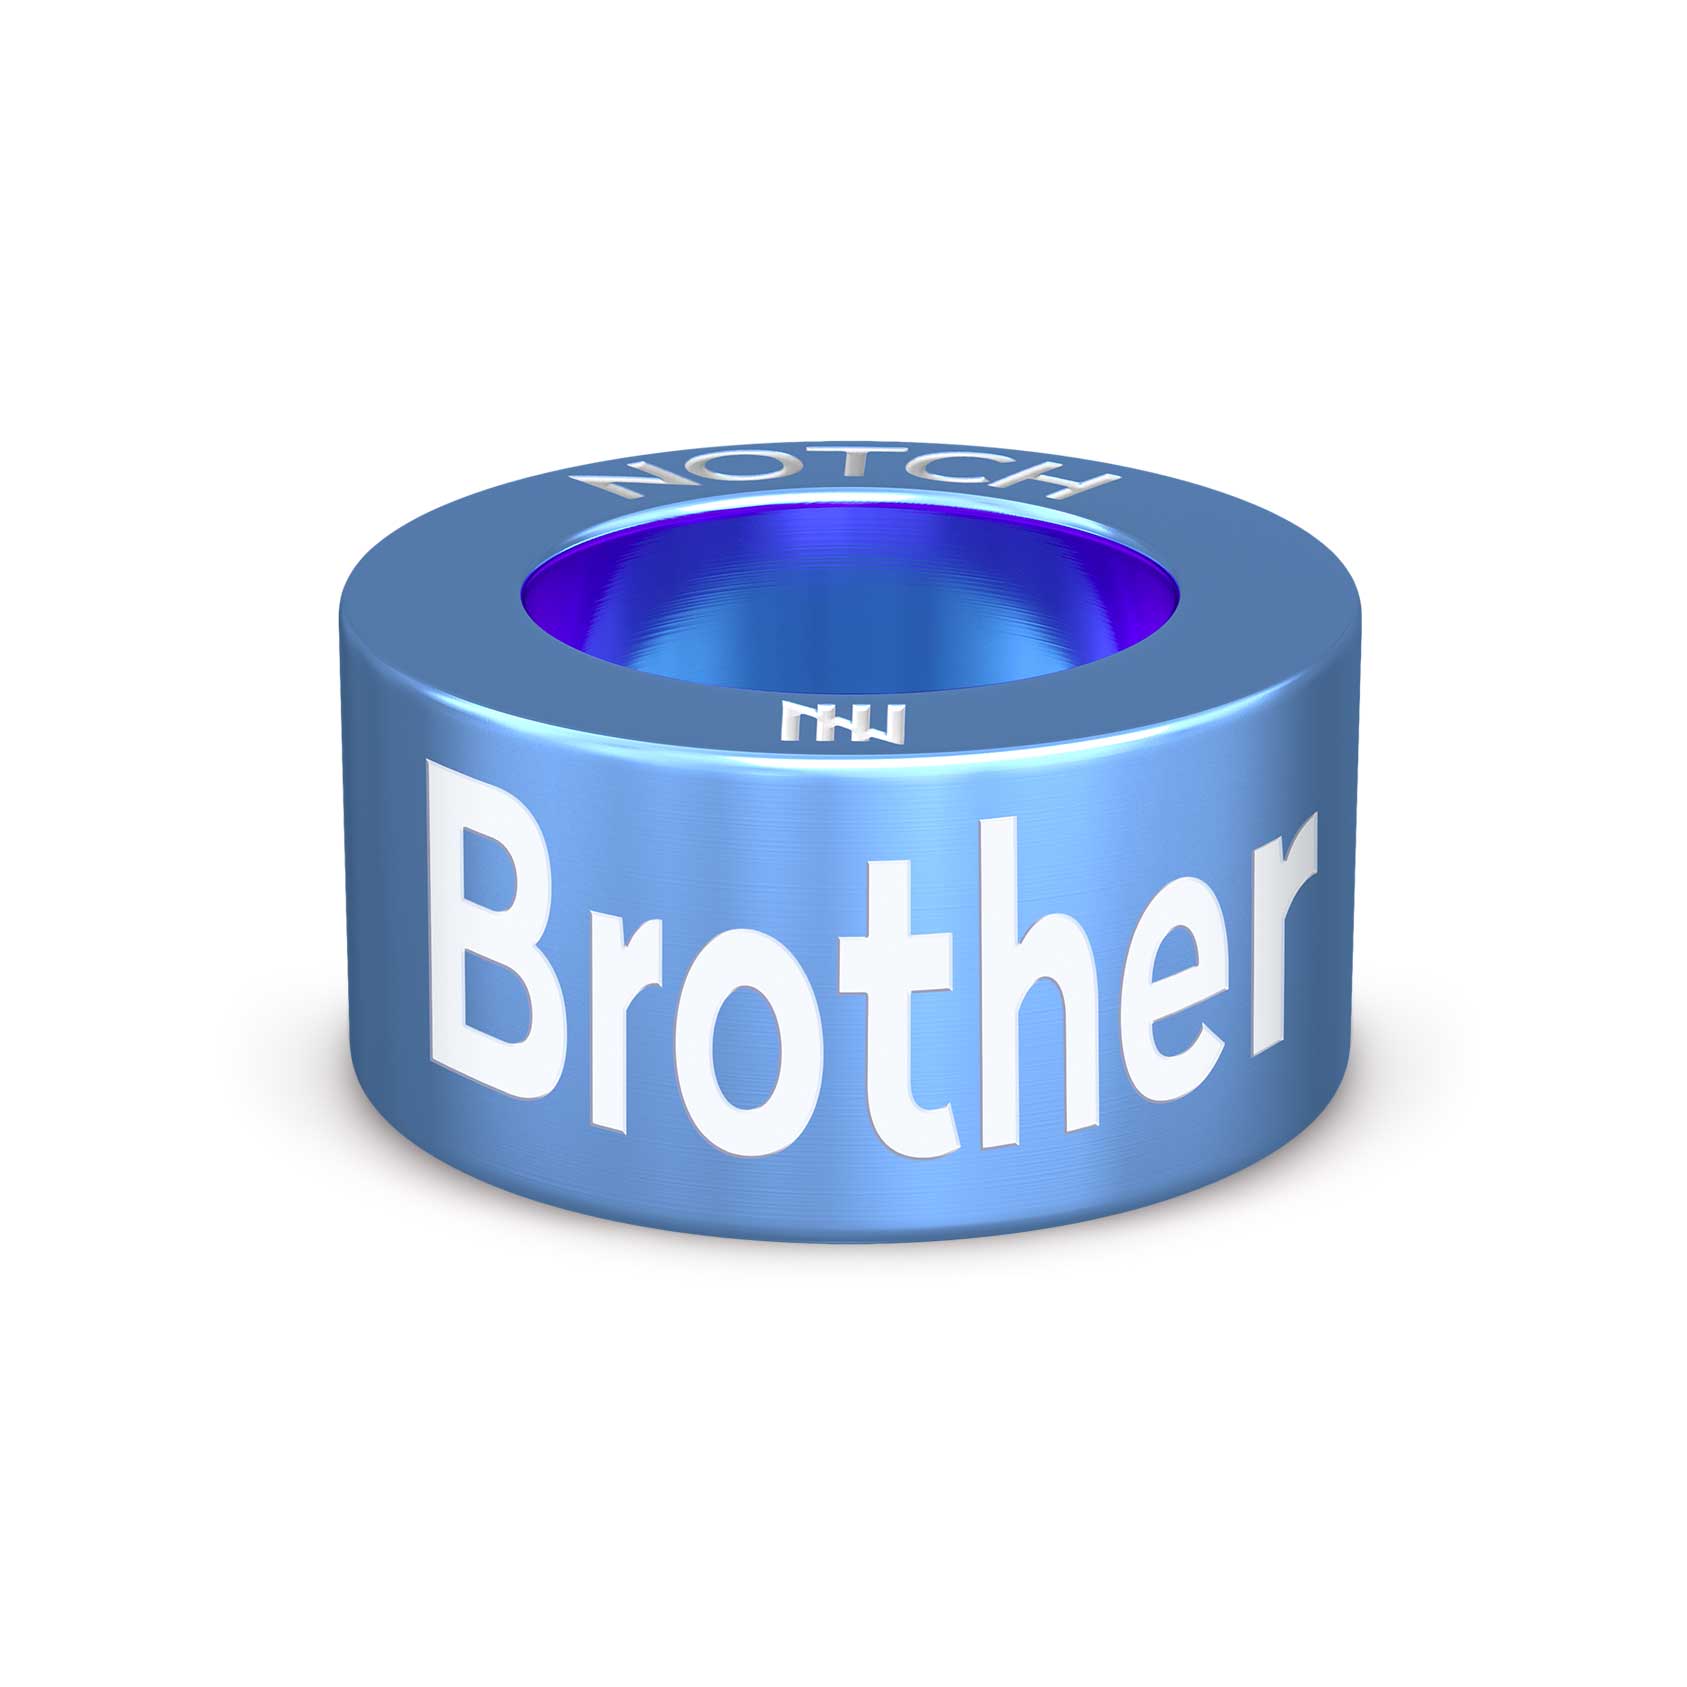 Brother NOTCH Charm